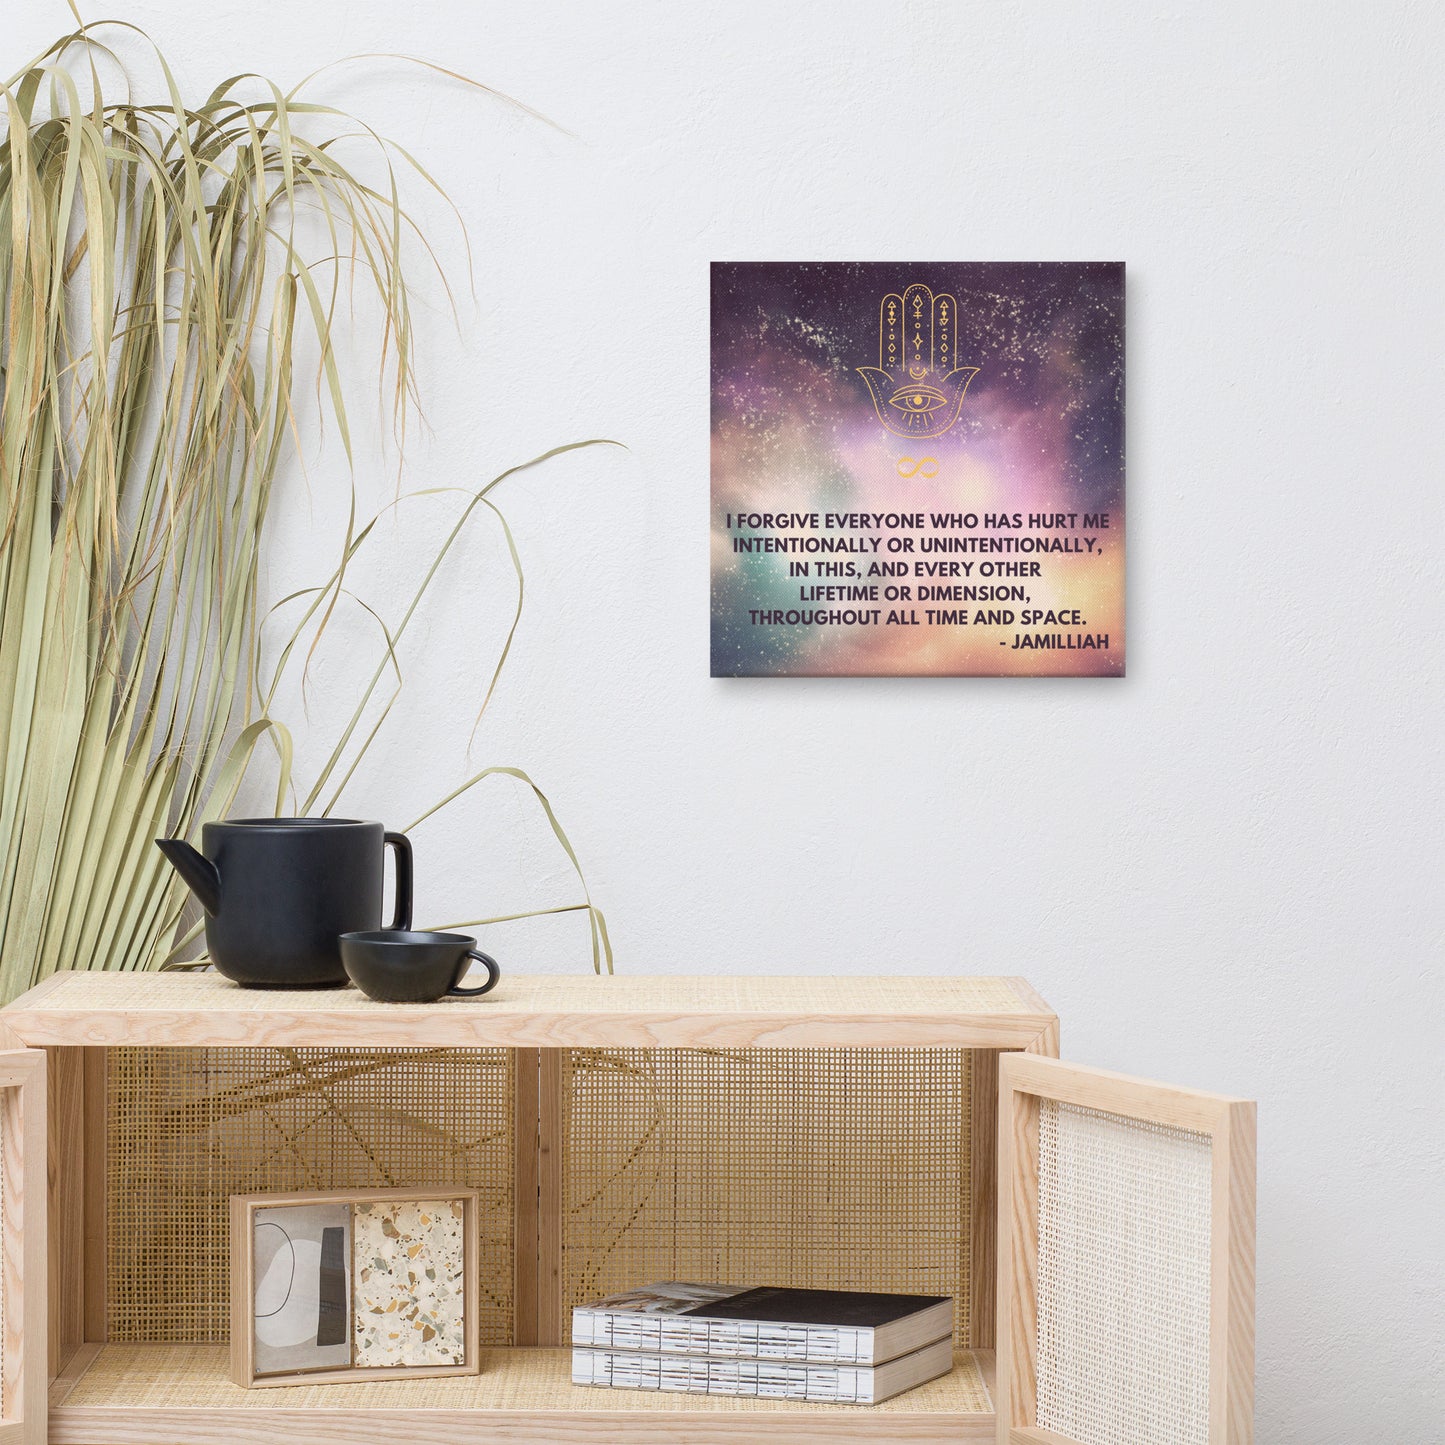 16x16 inch, semi-gloss, textured canvas print wall art. Purple/green/yellow space/universe/cosmos design with spiritual hamsa hand/infinity symbol/sign brand logo image, and original wise quote mantra/saying/tagline/motto/slogan. "I Forgive Everyone Who Has Hurt Me Intentionally Or Unintentionally, In This, And Every Other Lifetime Or Dimension, Throughout All Time And Space. - Jamilliah." Shown on wall next to plant, cabinet, mug, and teapot. JAMILLIAH'S WISDOM IS TIMELESS SHOP - wisdomistimeless.com.